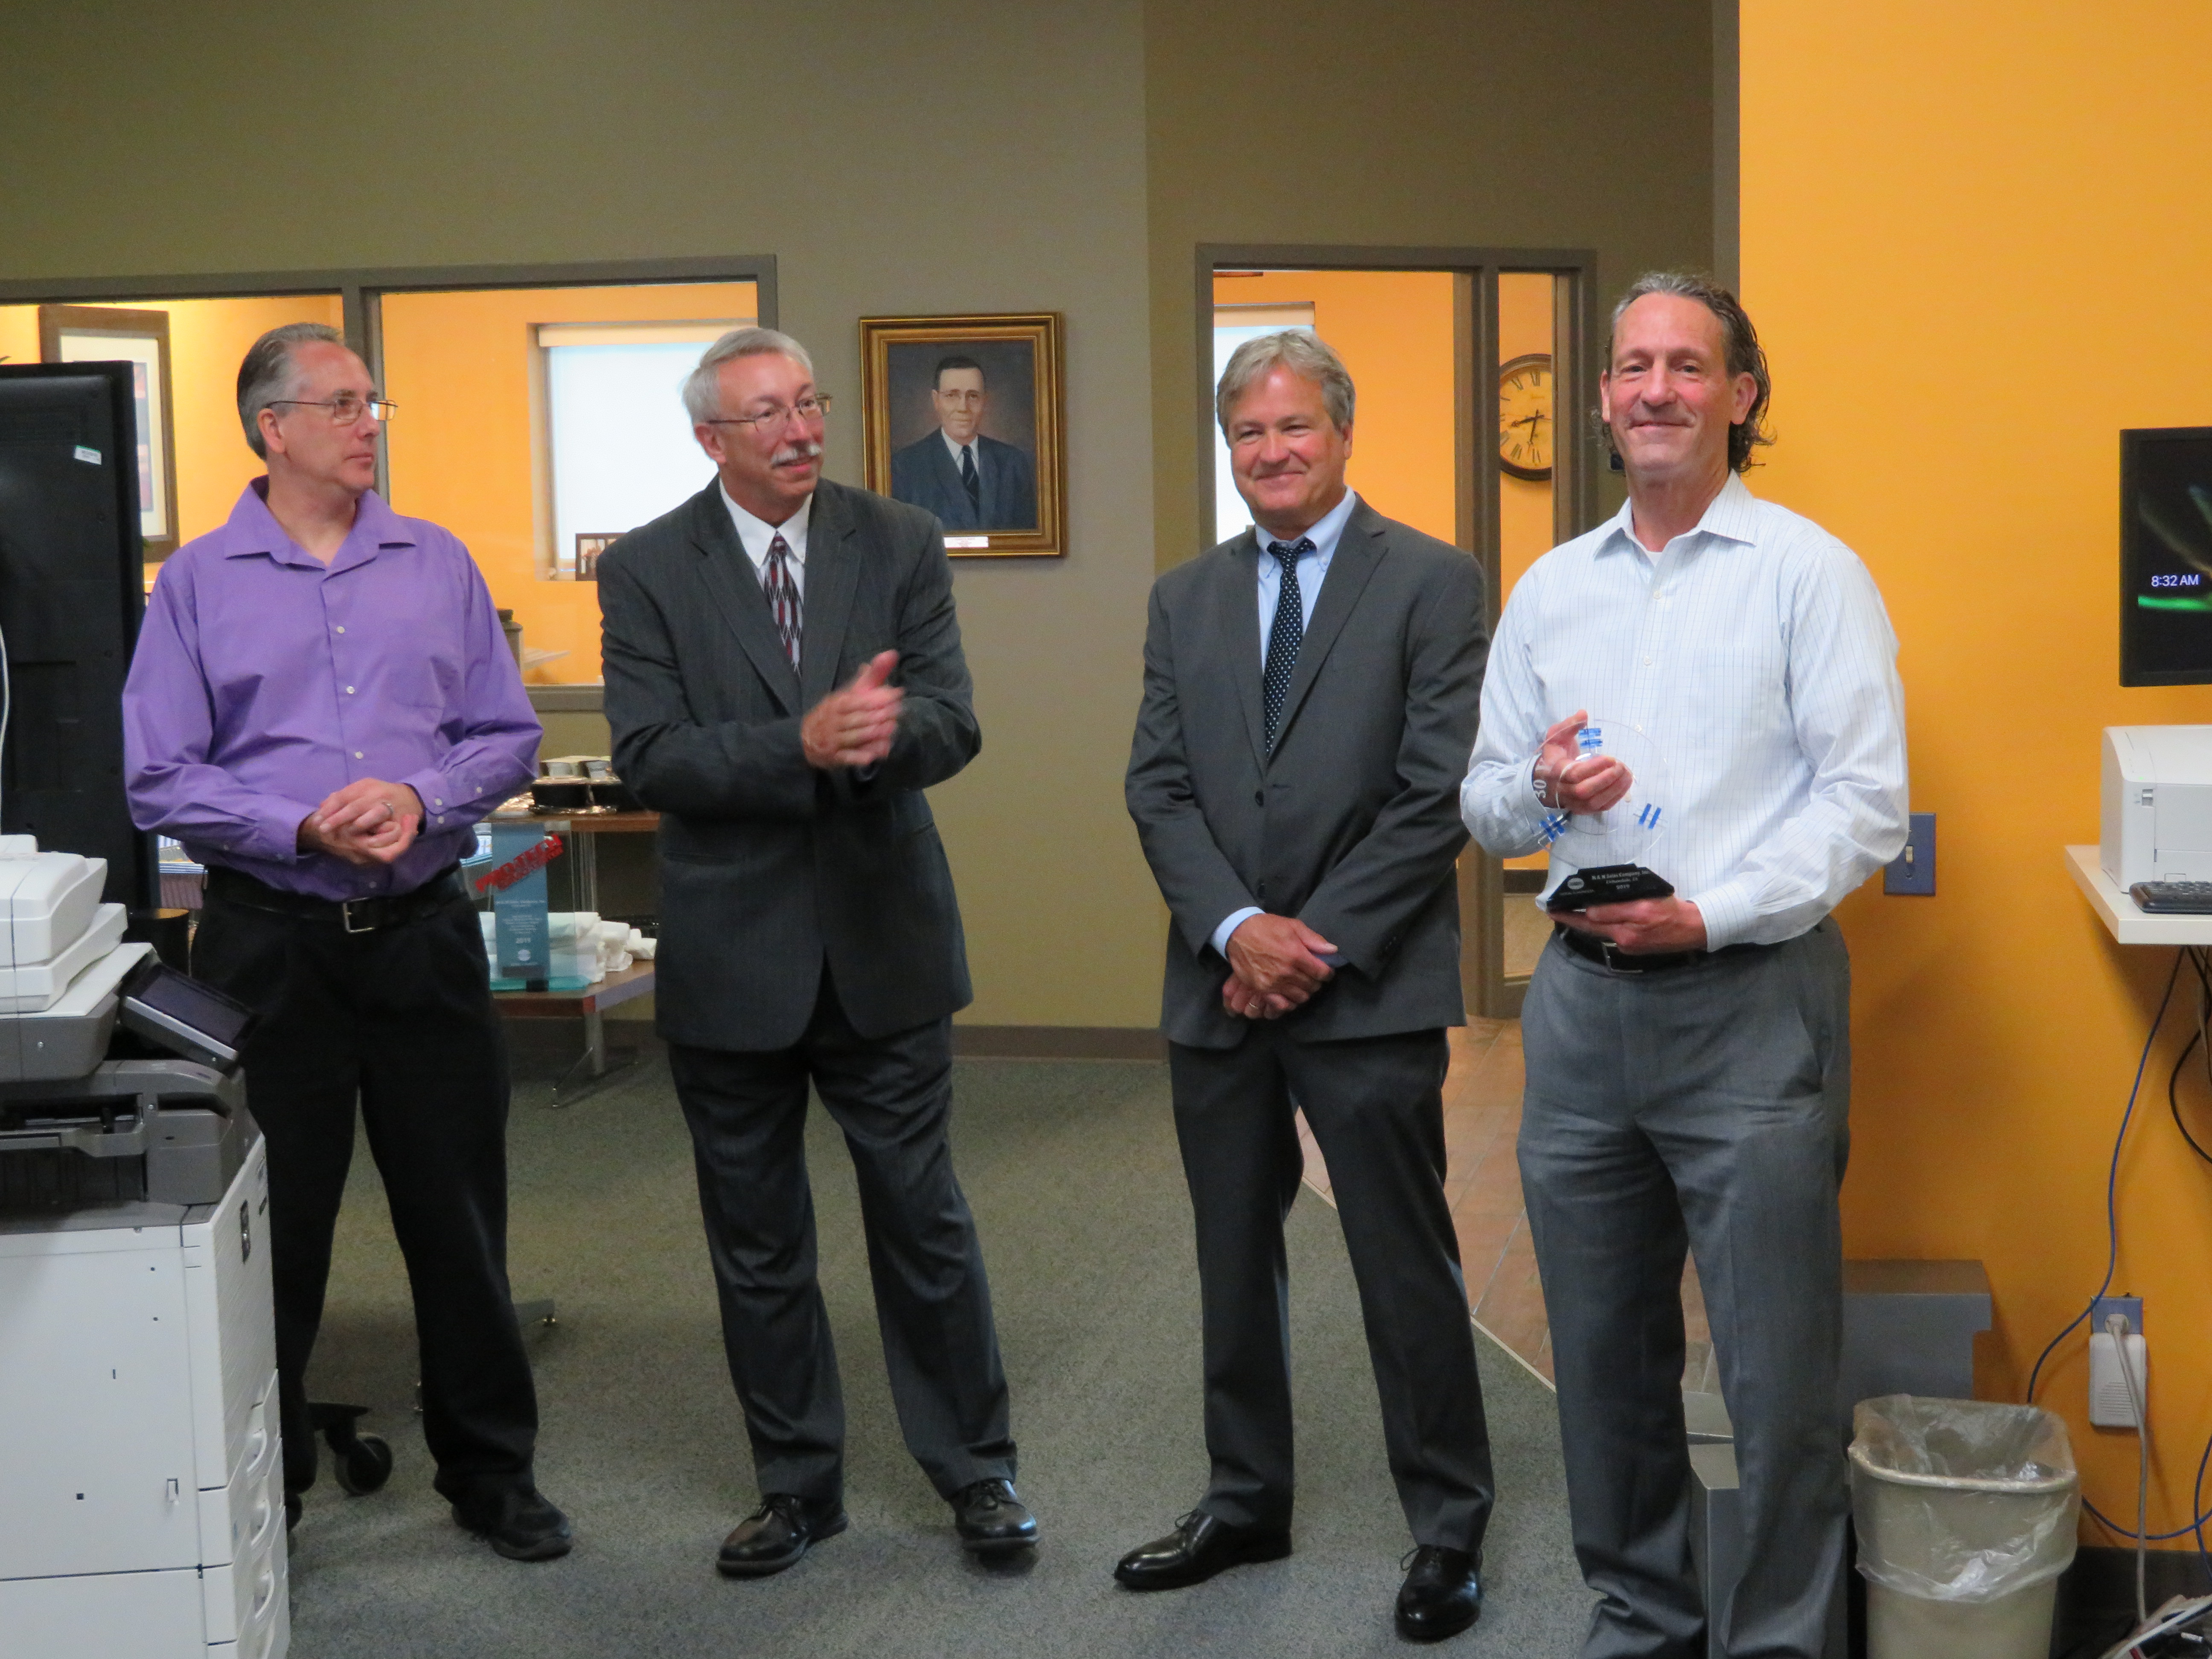 September 18, 2019 – Urbandale, IA – MMIT Business Solutions (MMIT) was presented with a special Konica Minolta Pro-Tech Service Award as recognition for 30 consecutive years earning Pro-Tech certification.  (L-R) John Skow, Technical Services Manager, MMIT; James Boyic, Regional Service Manager, Konica Minolta; Kevin Streuli, Director, Field & Systems Support, Konica Minolta; Tom Minor, President, MMIT